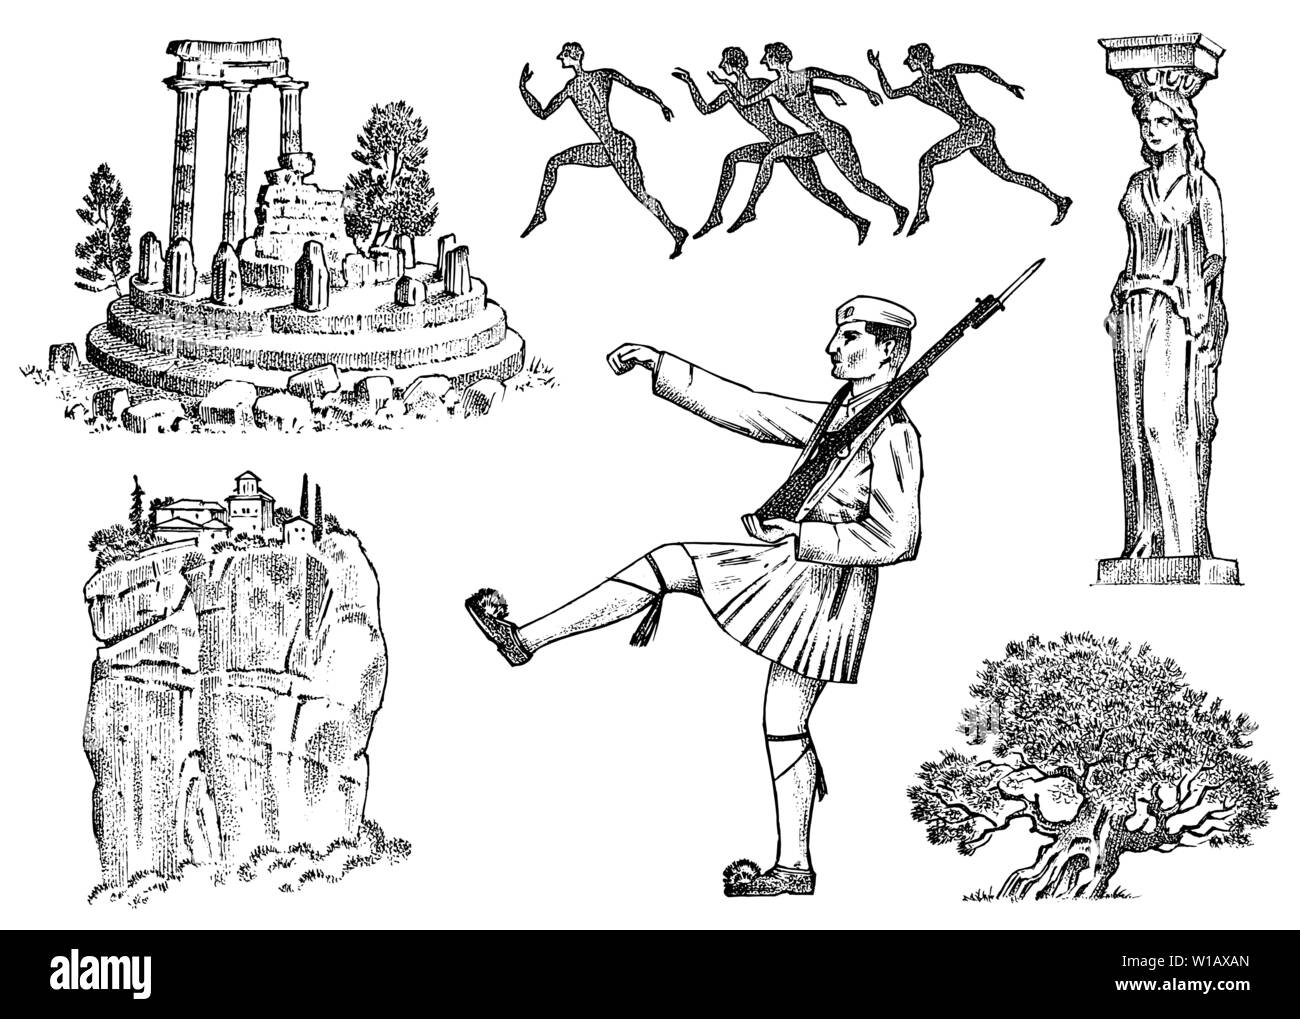 Greek culture. Set of national symbols. Ruins and rock, military and statue in a column, marathon runners and a tree. Hand drawn engraved sketch in Stock Vector